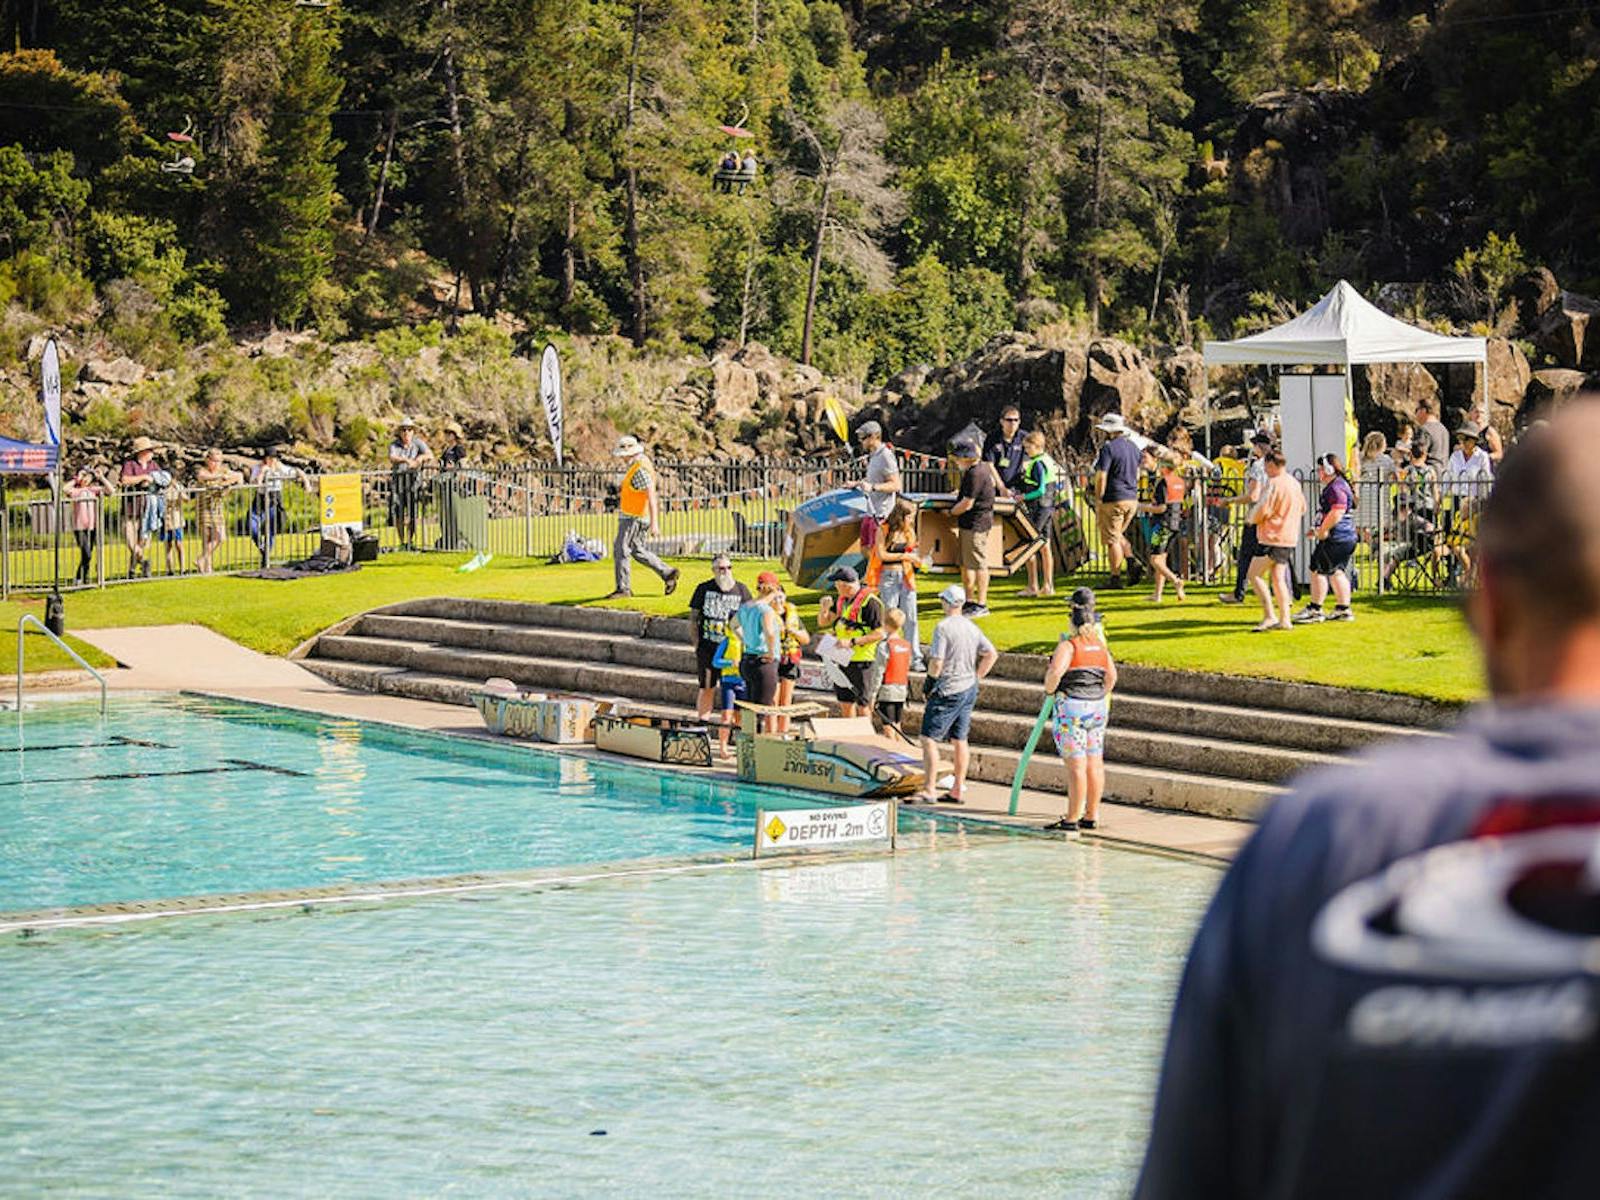 Soggy Bottom Boat Race and Cataract Gorge public free pool